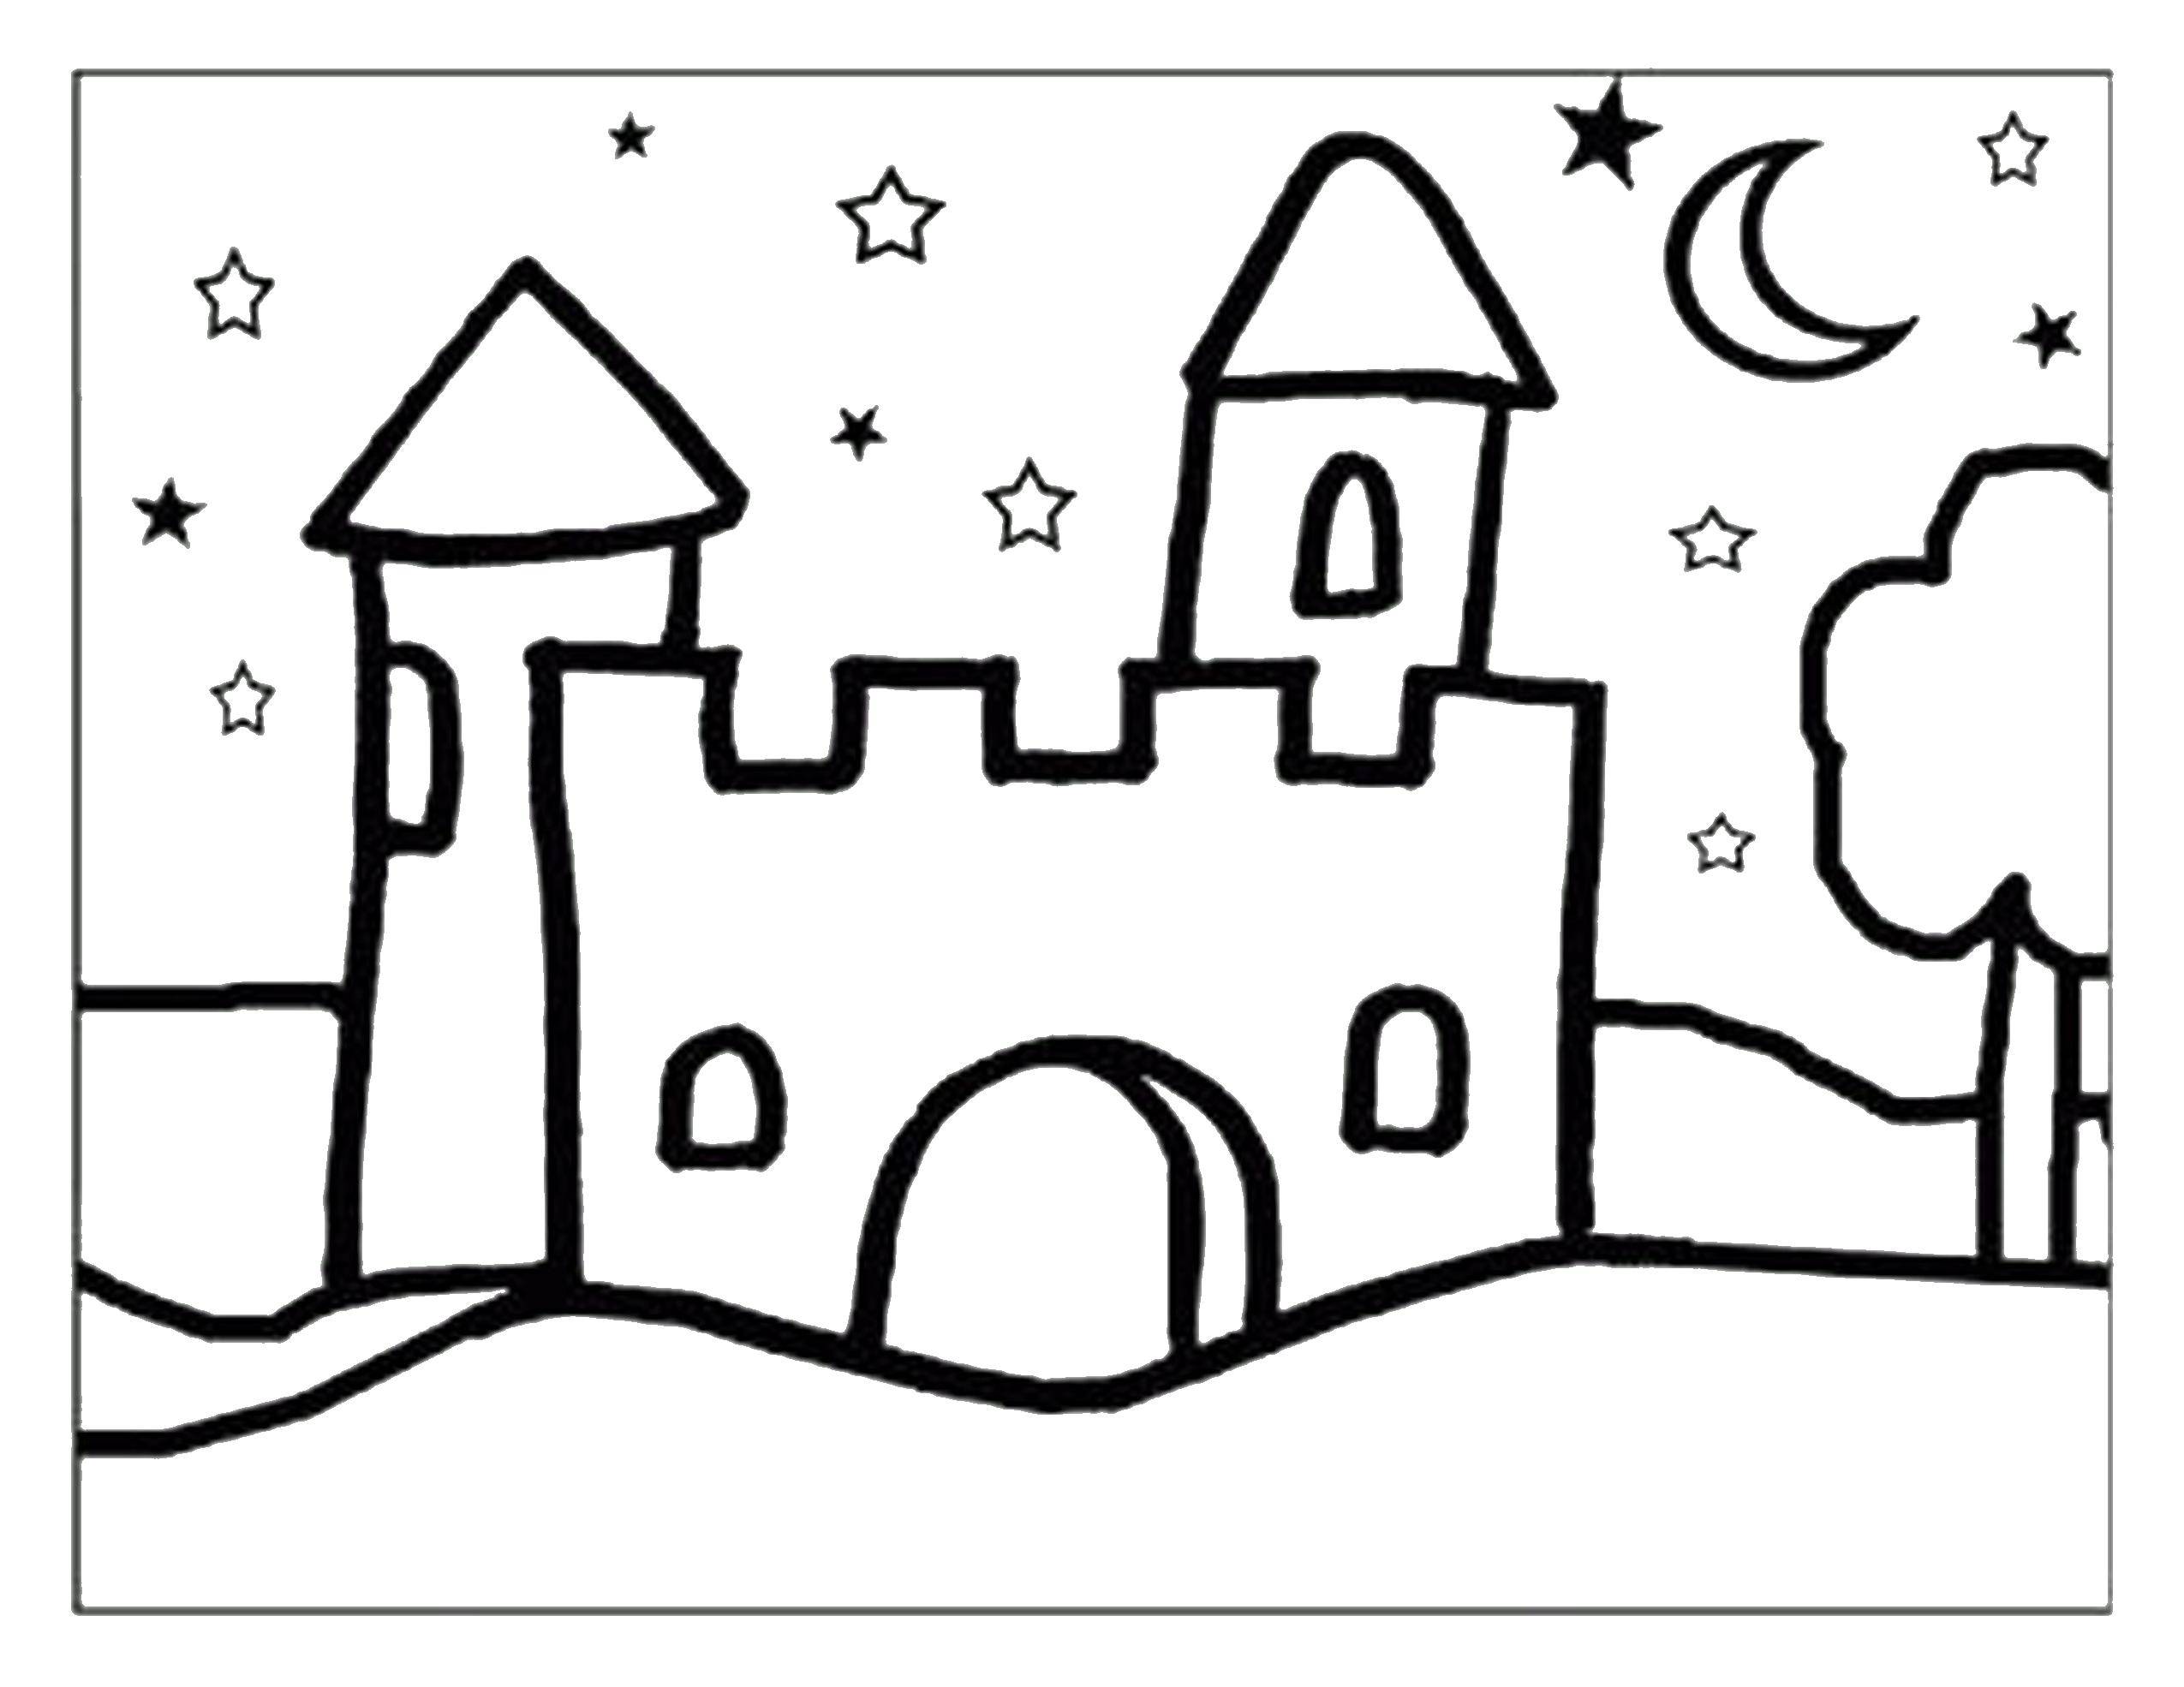 Coloring Castle. Category locks . Tags:  castle, tower, night.